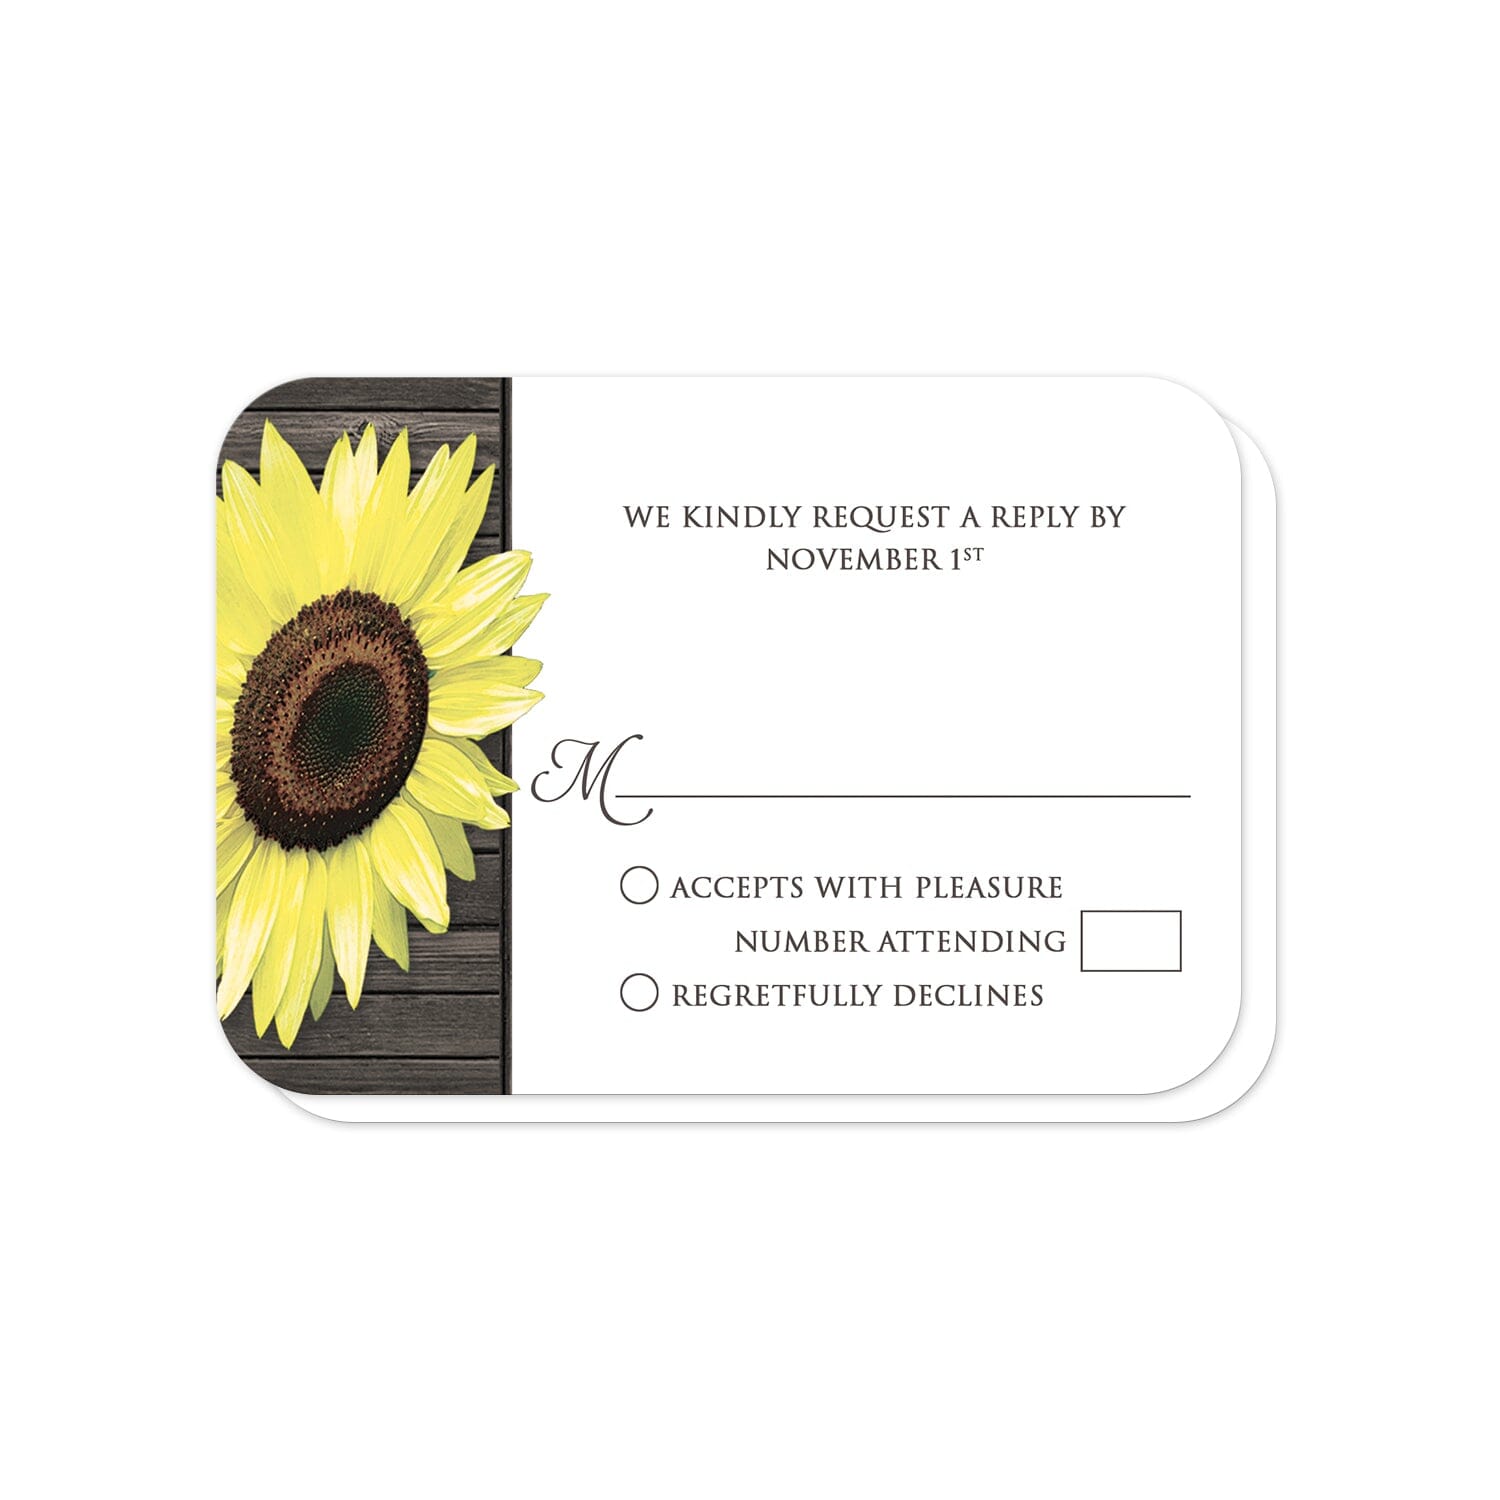 Rustic Sunflower Wood Mason Jar RSVP Cards (with rounded corners) at Artistically Invited.